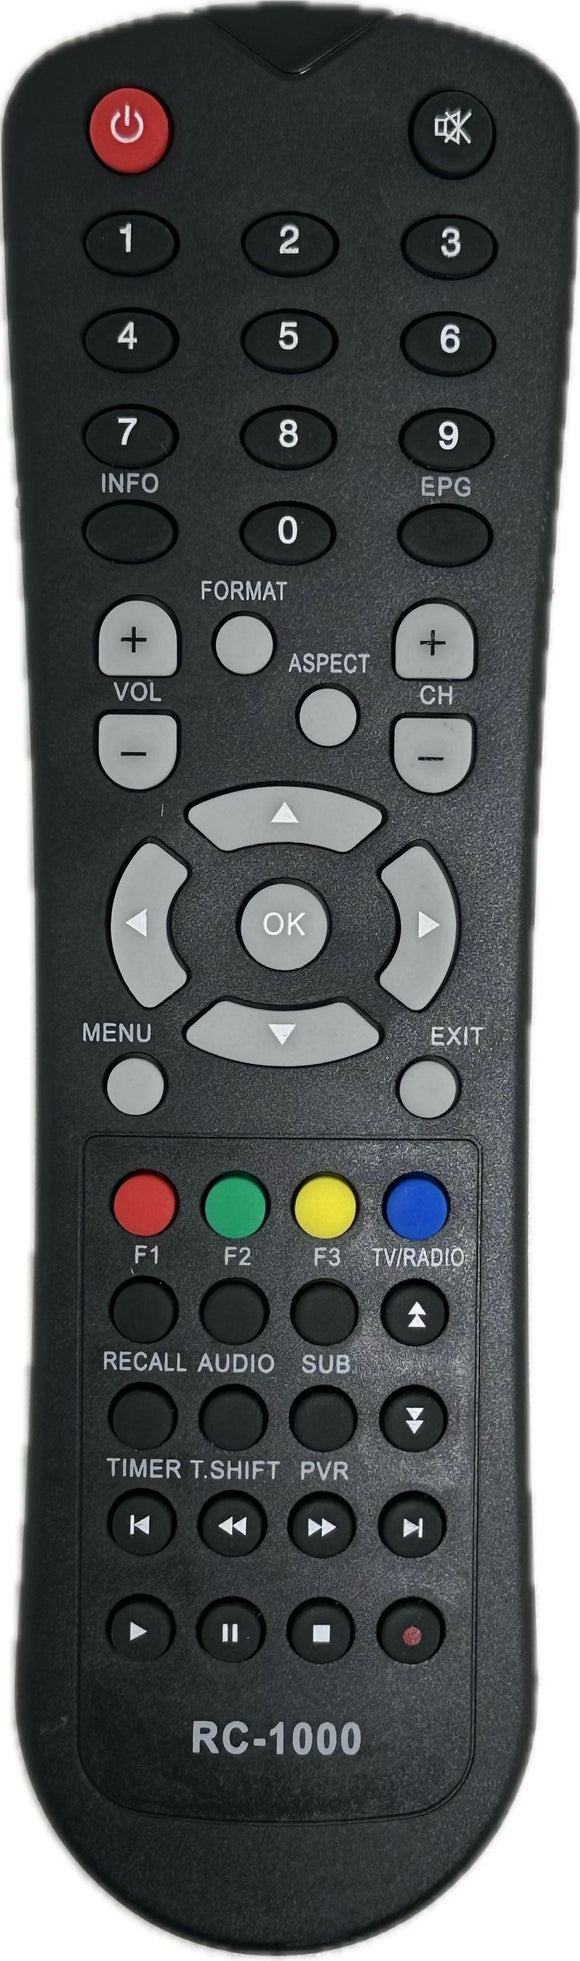 Bauhn AS-PVR500R  PVR Replacement Remote Control